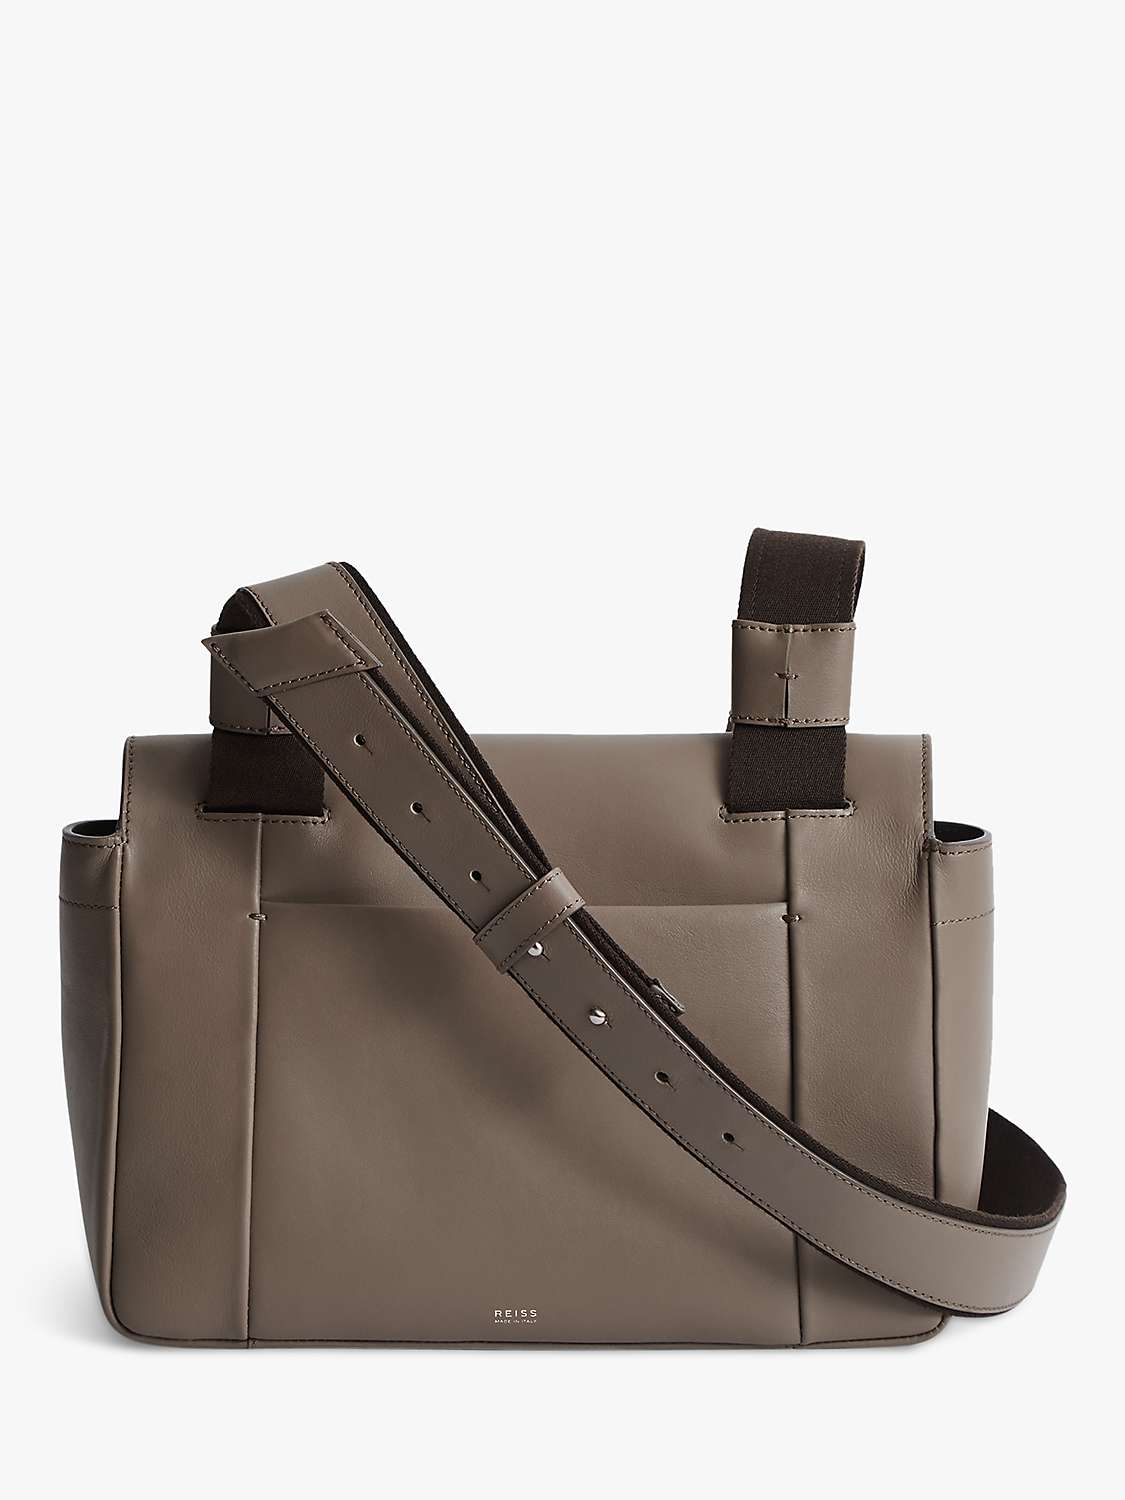 Buy Reiss Alma Leather Sporty Cross Body Bag, Taupe Online at johnlewis.com